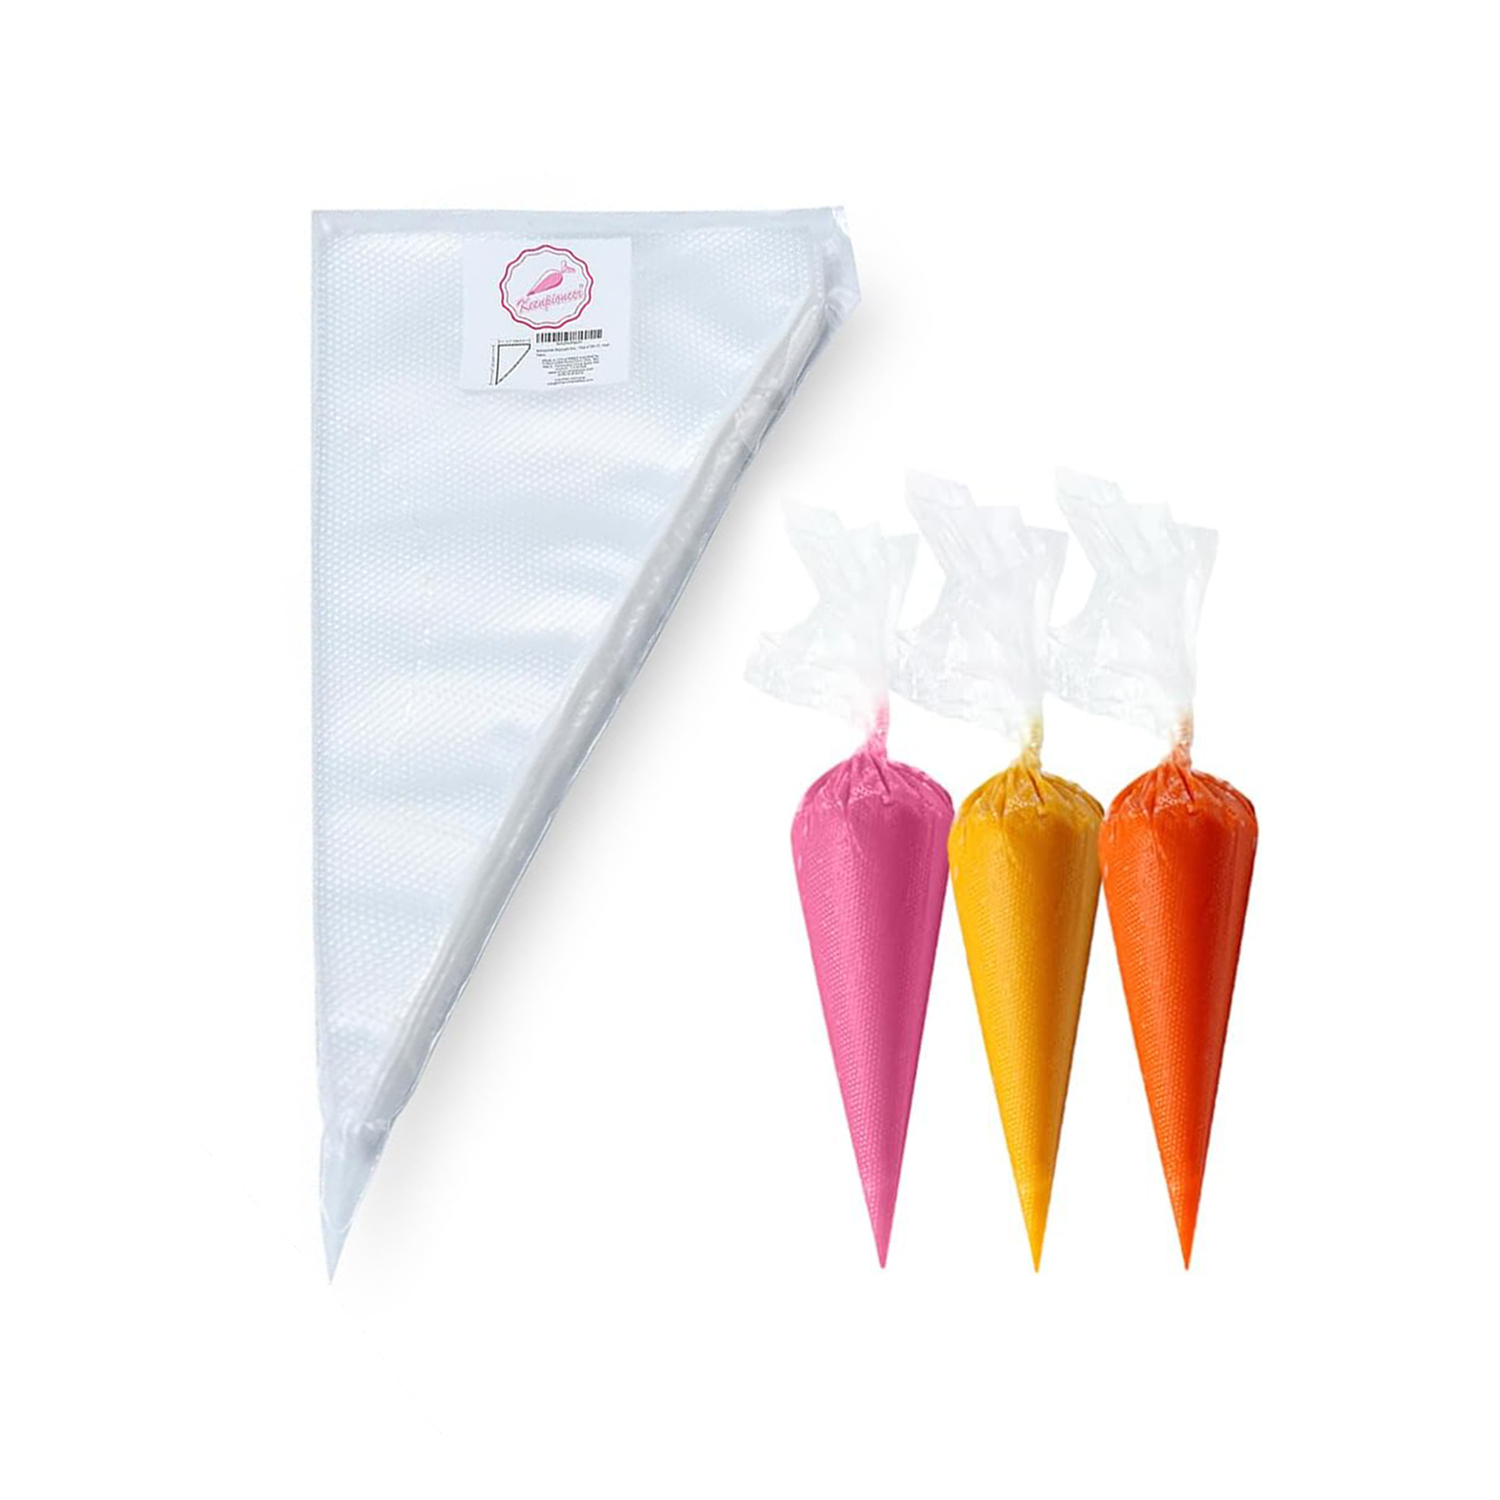 Disposable piping bags